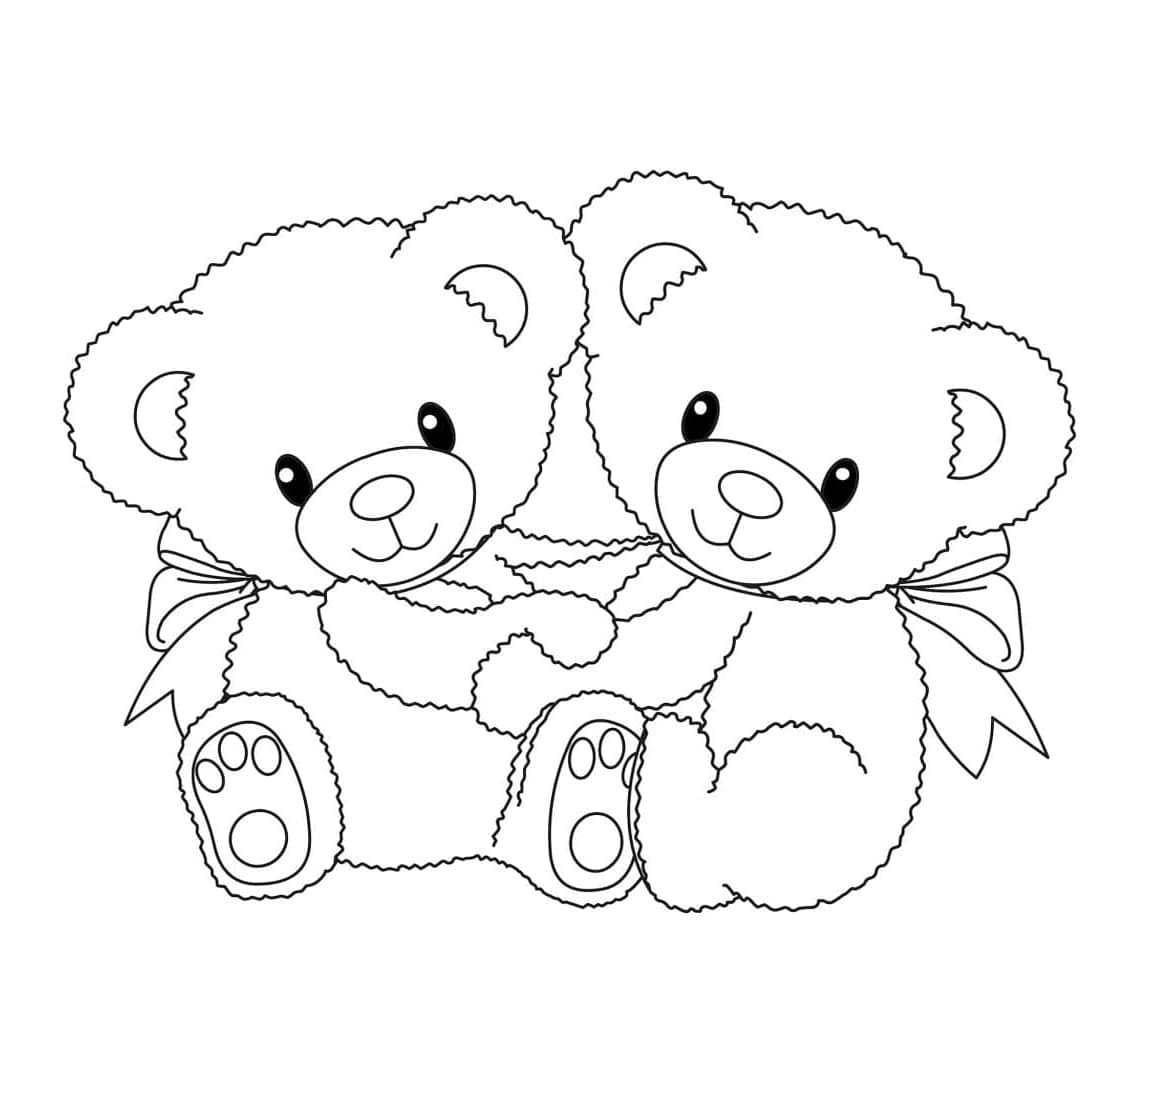 Printable Two Baby Teddy Bears Coloring Page